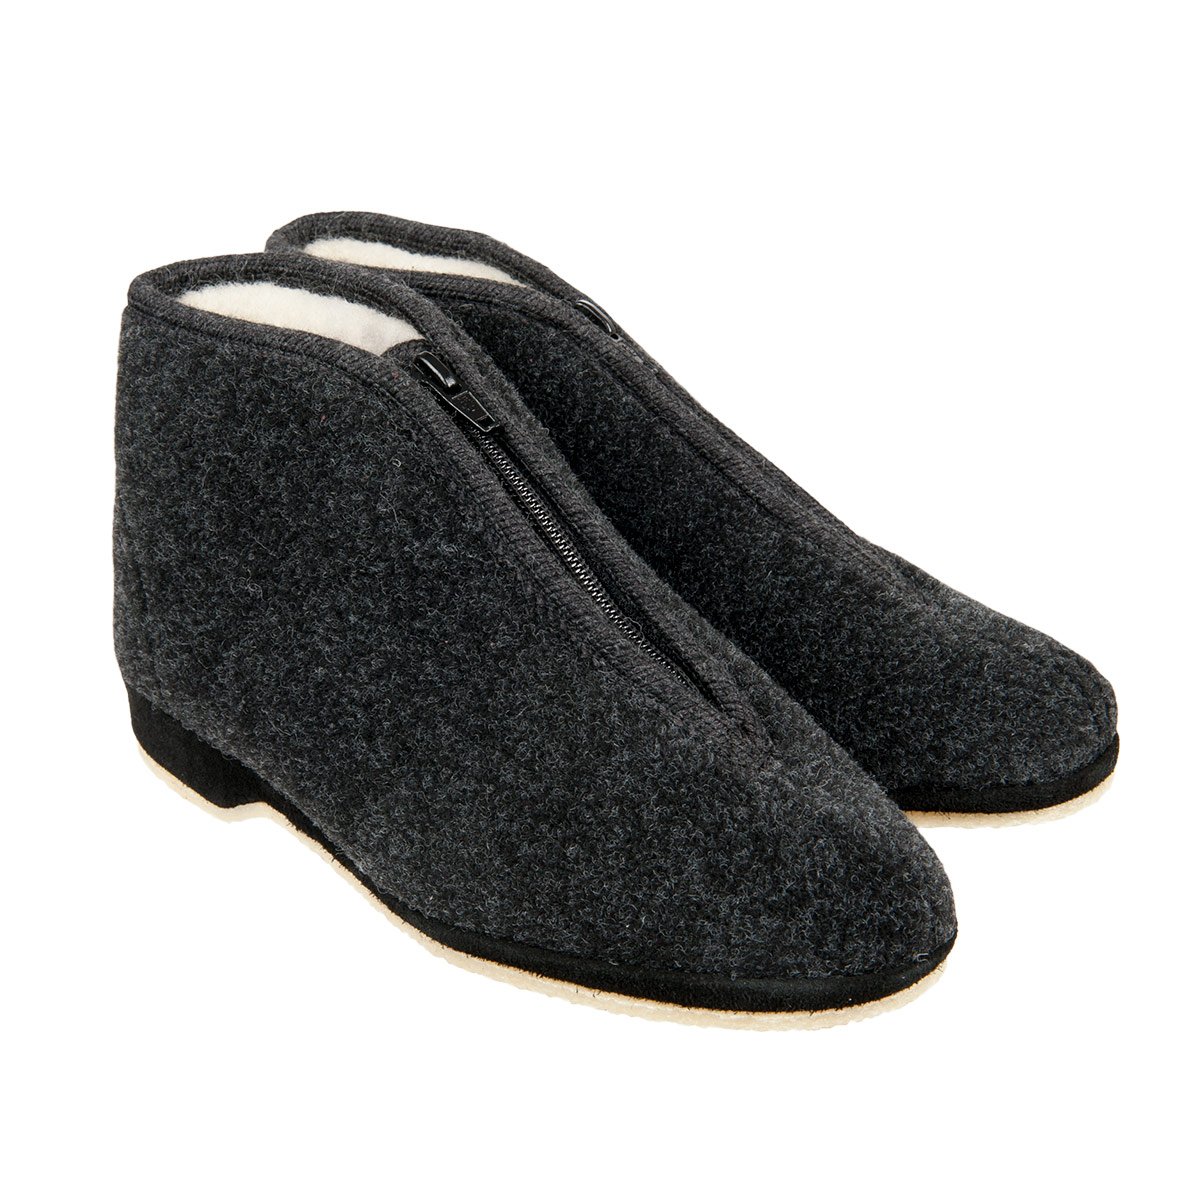 height slippers